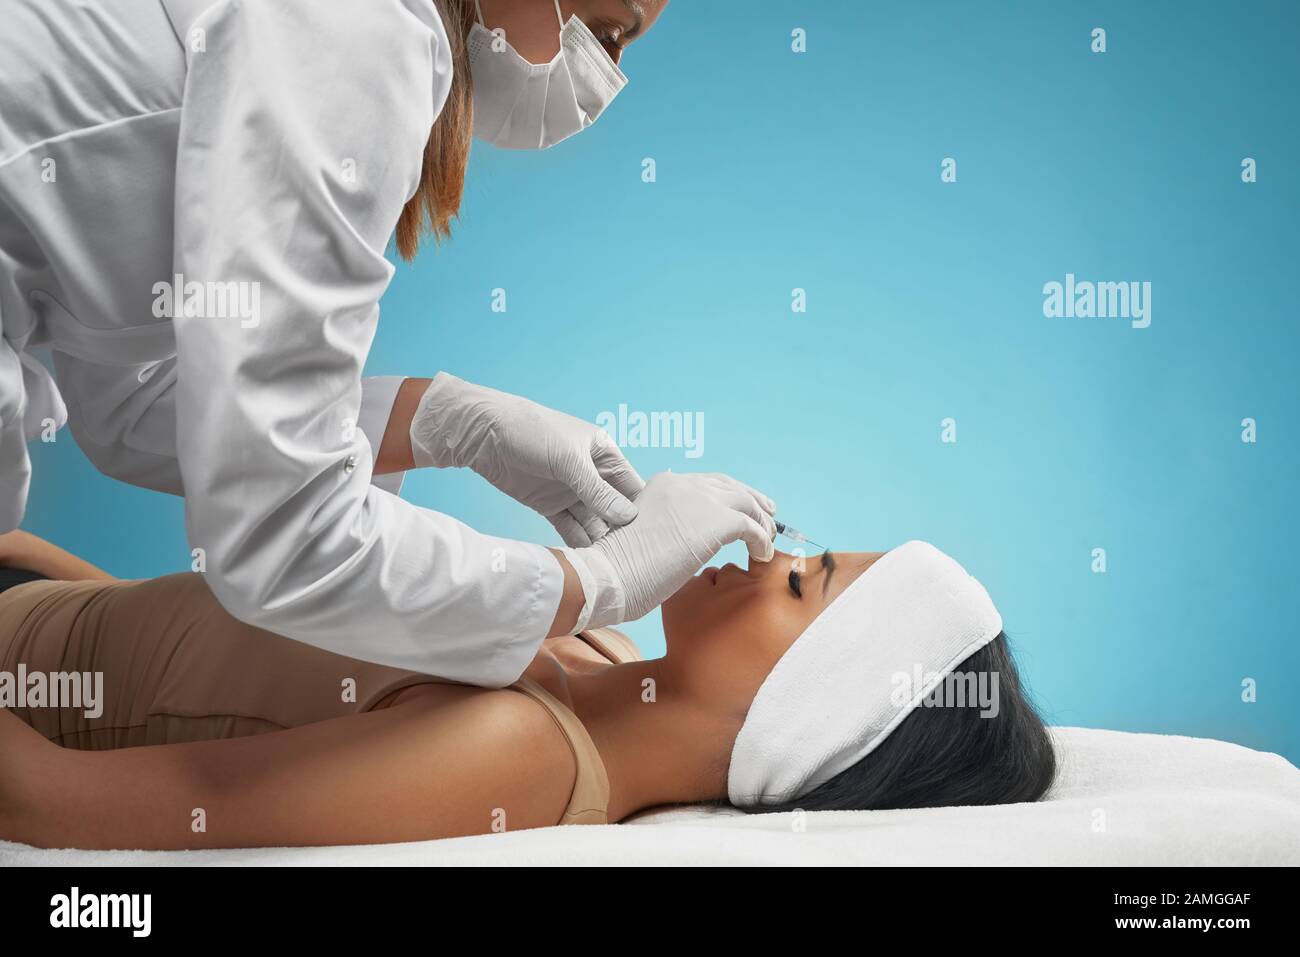 Side view of injection in female forehead. Cosmetologist in doctors coat using syringe with botox and cotton pad, brunette patient with closed eyes lying on couch. Concept of cosmetology, beauty. Stock Photo